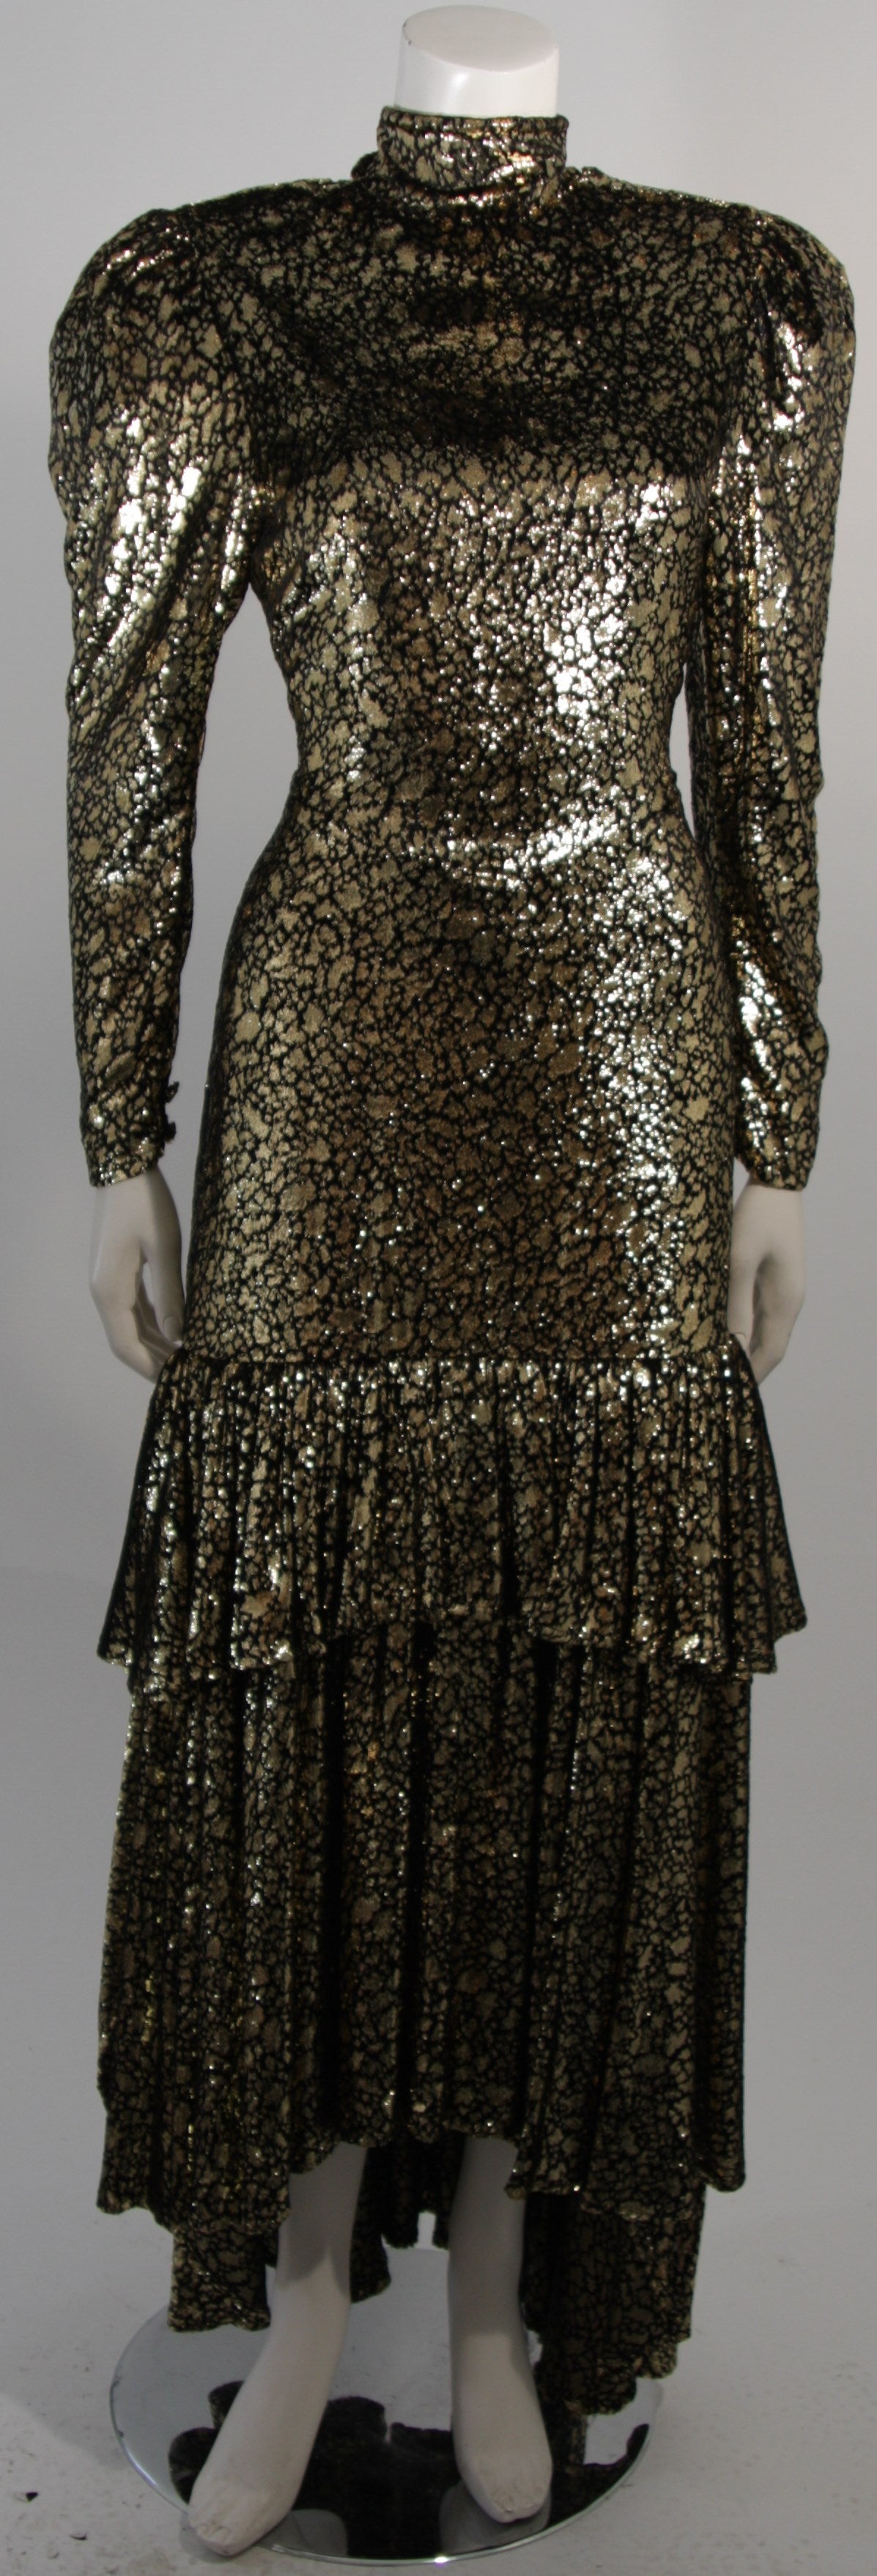 Sonia Rykiel Black and Gold Metallic Accented Tiered Gown Size Small ...